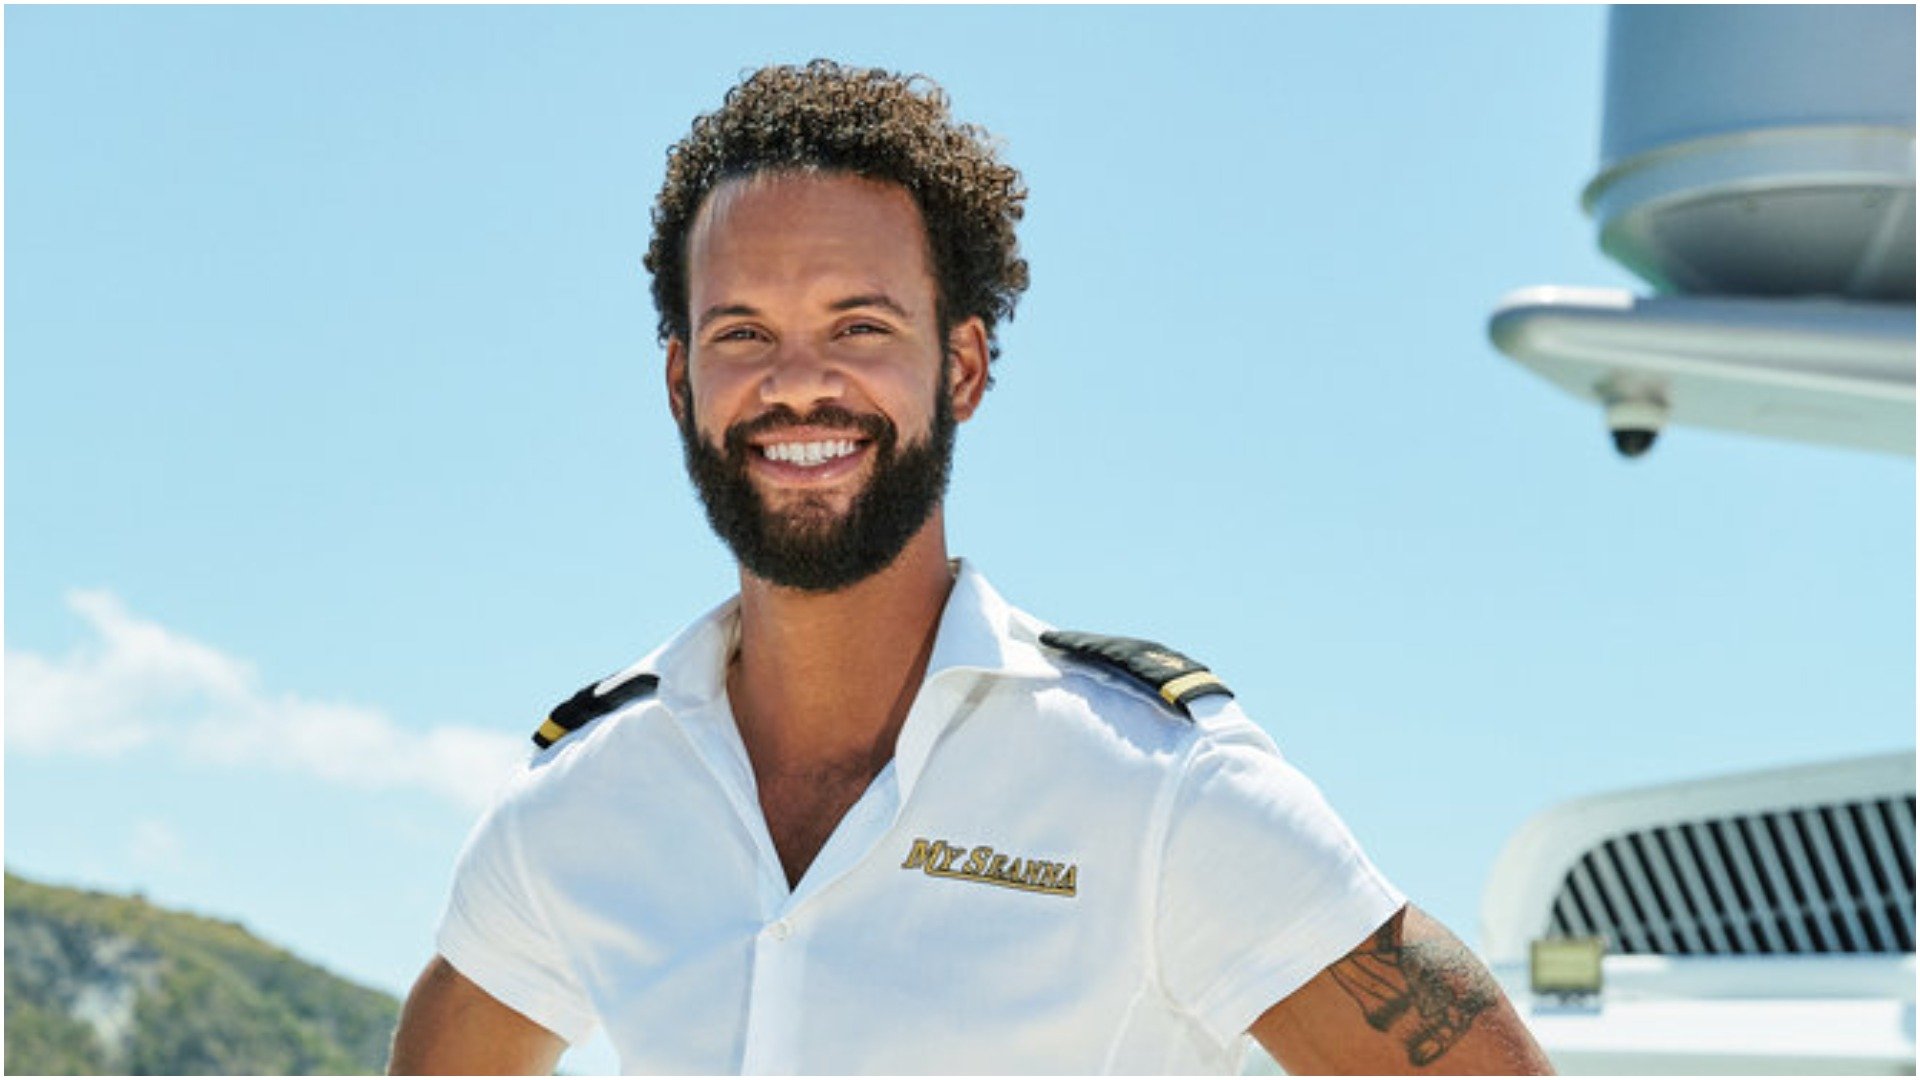 Wes O'Dell from 'Below Deck' cast photo 